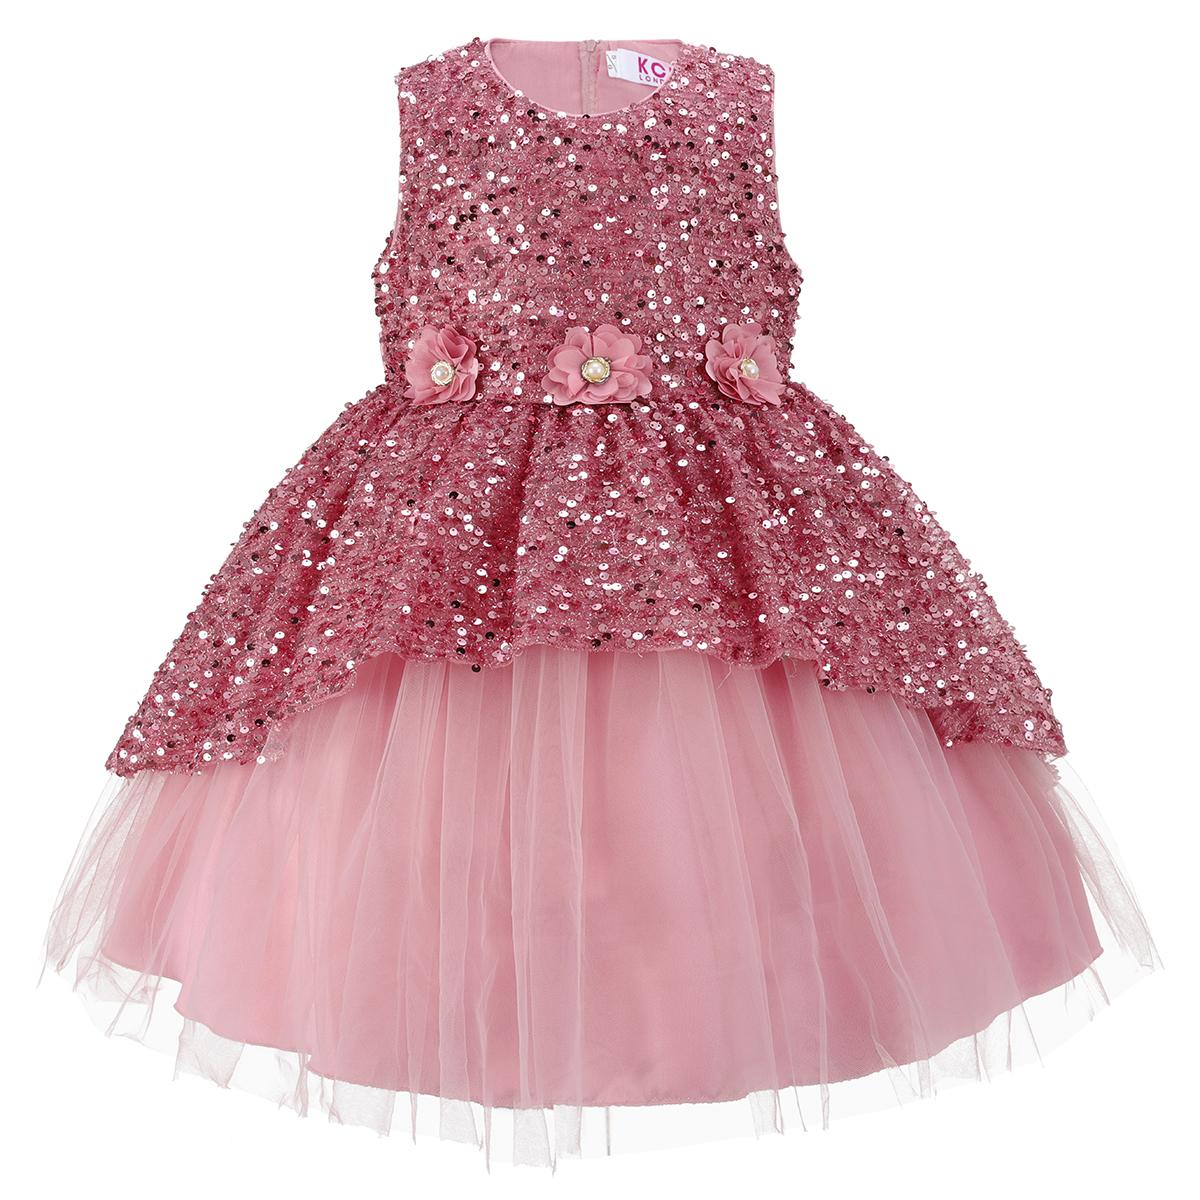 Rose Pink Sequin Tulle Overlay Dress